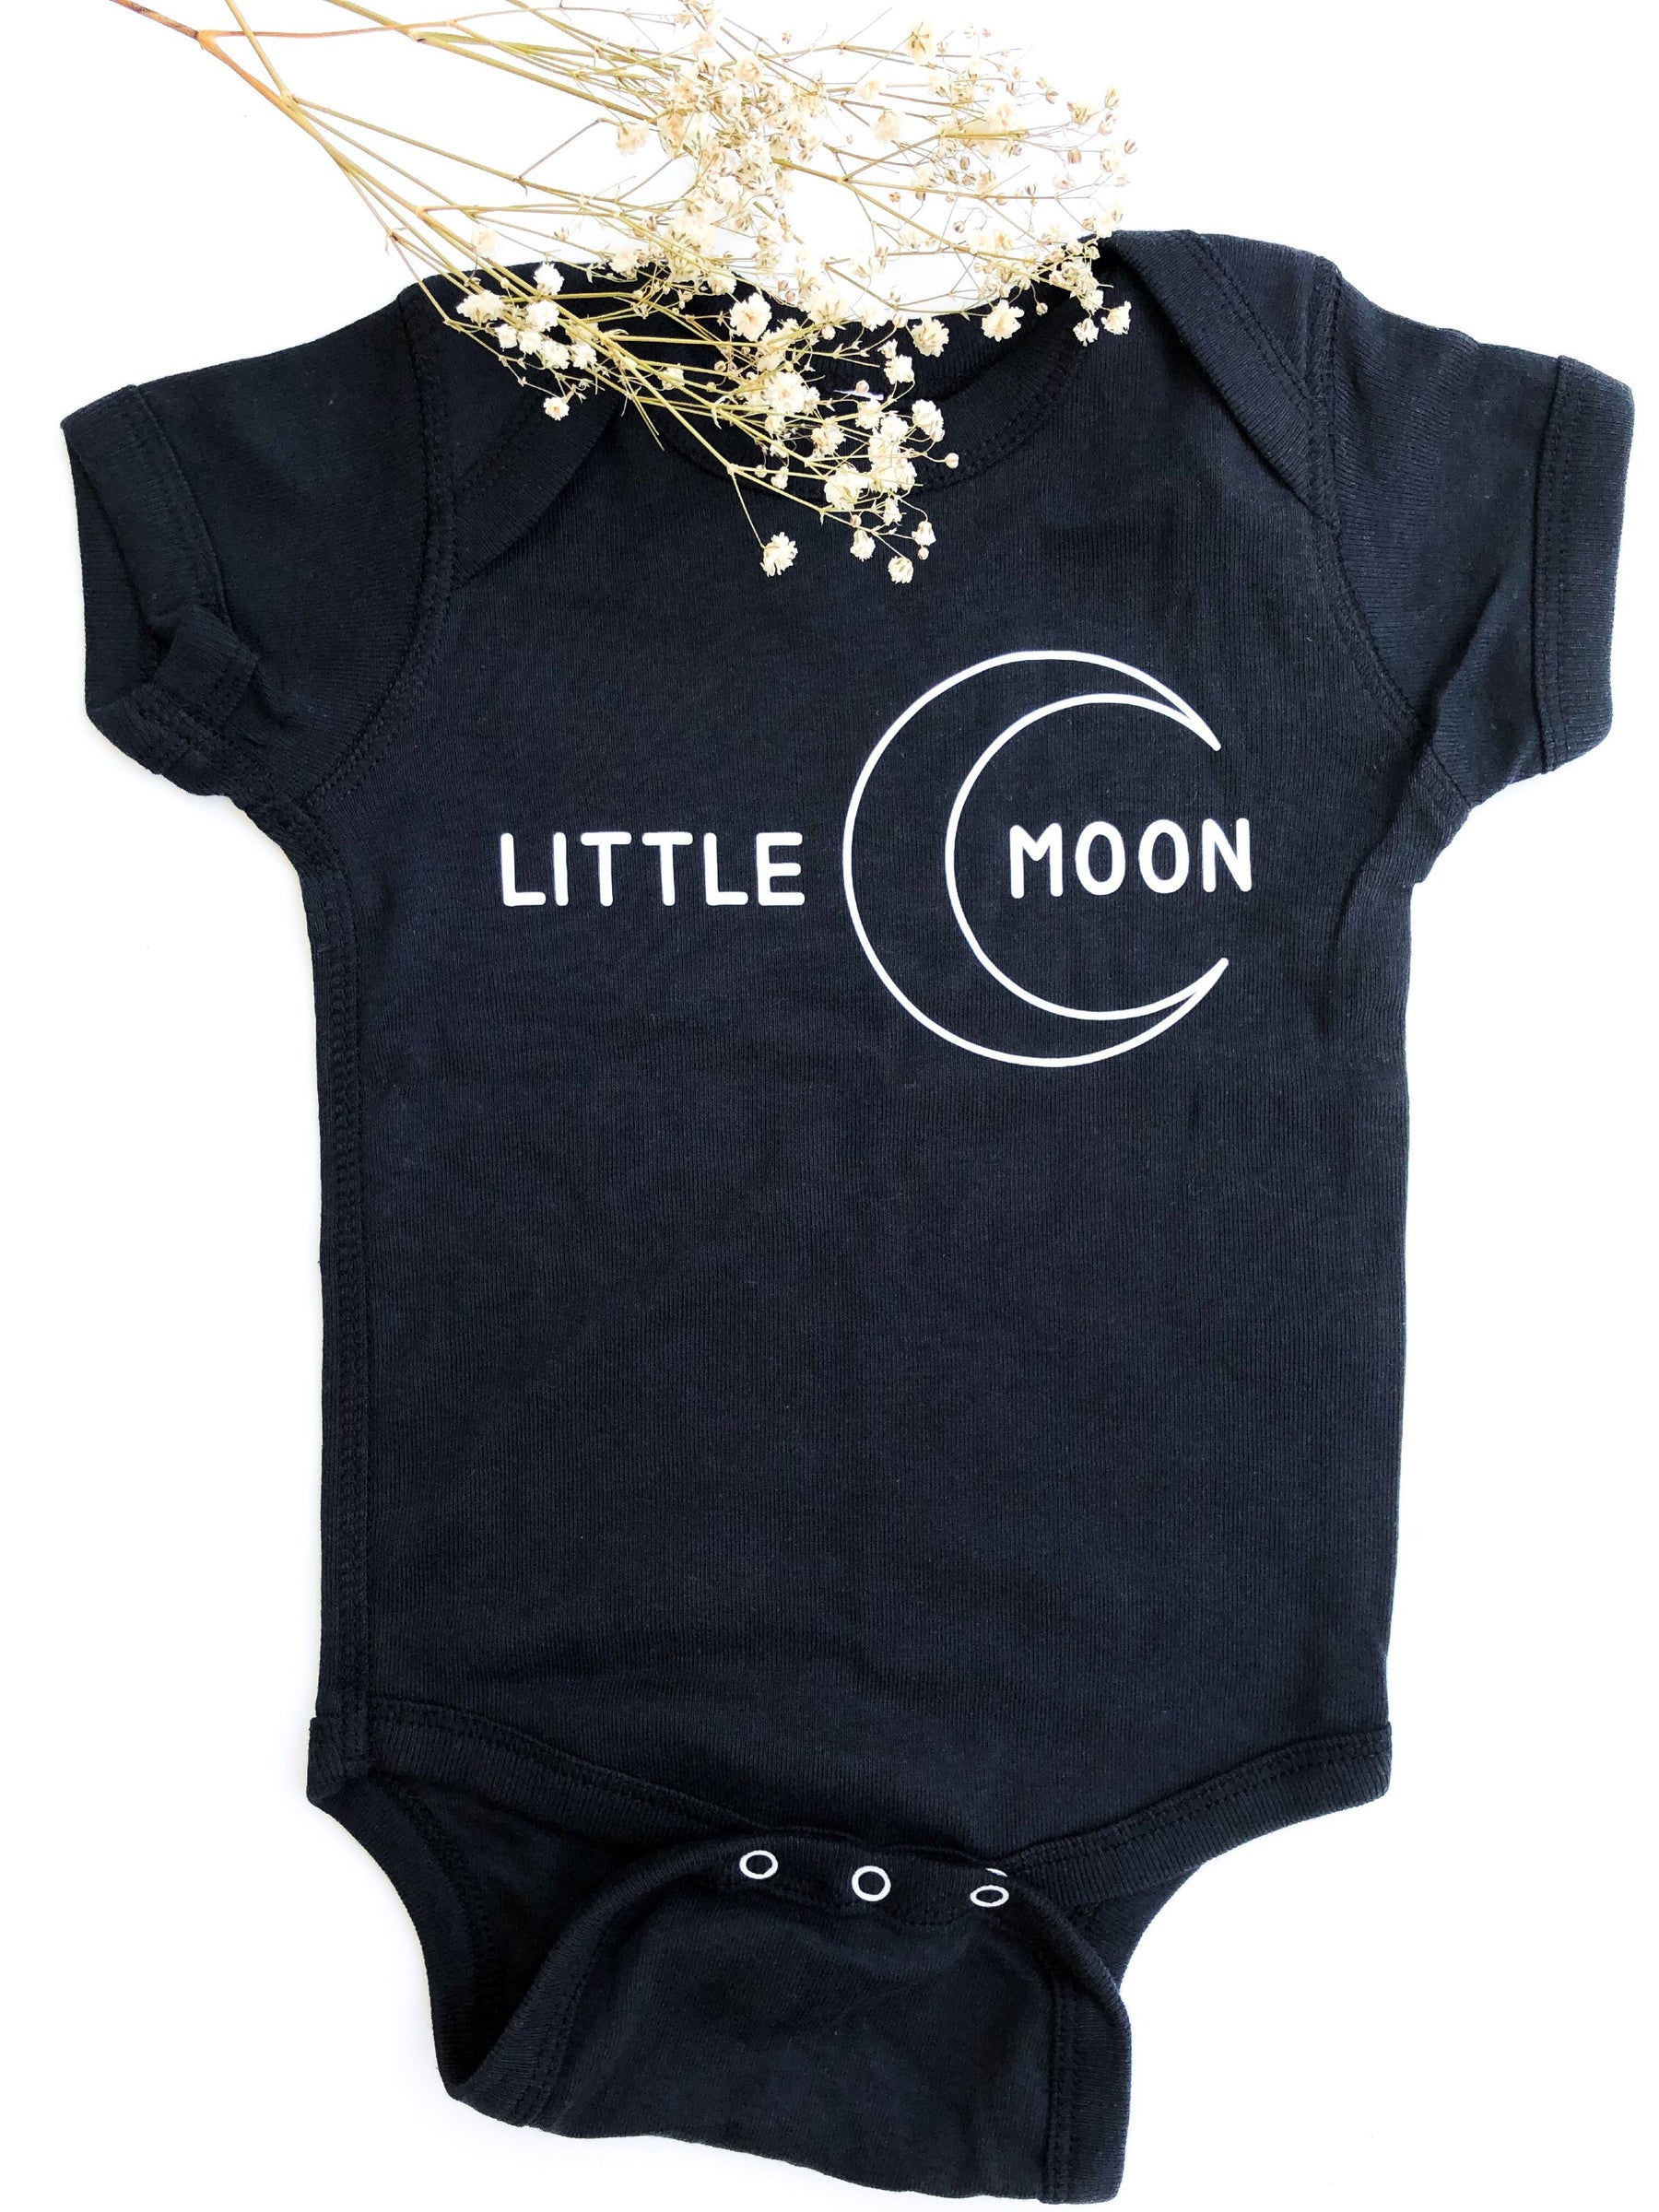 Little moon onesie with moon graphic